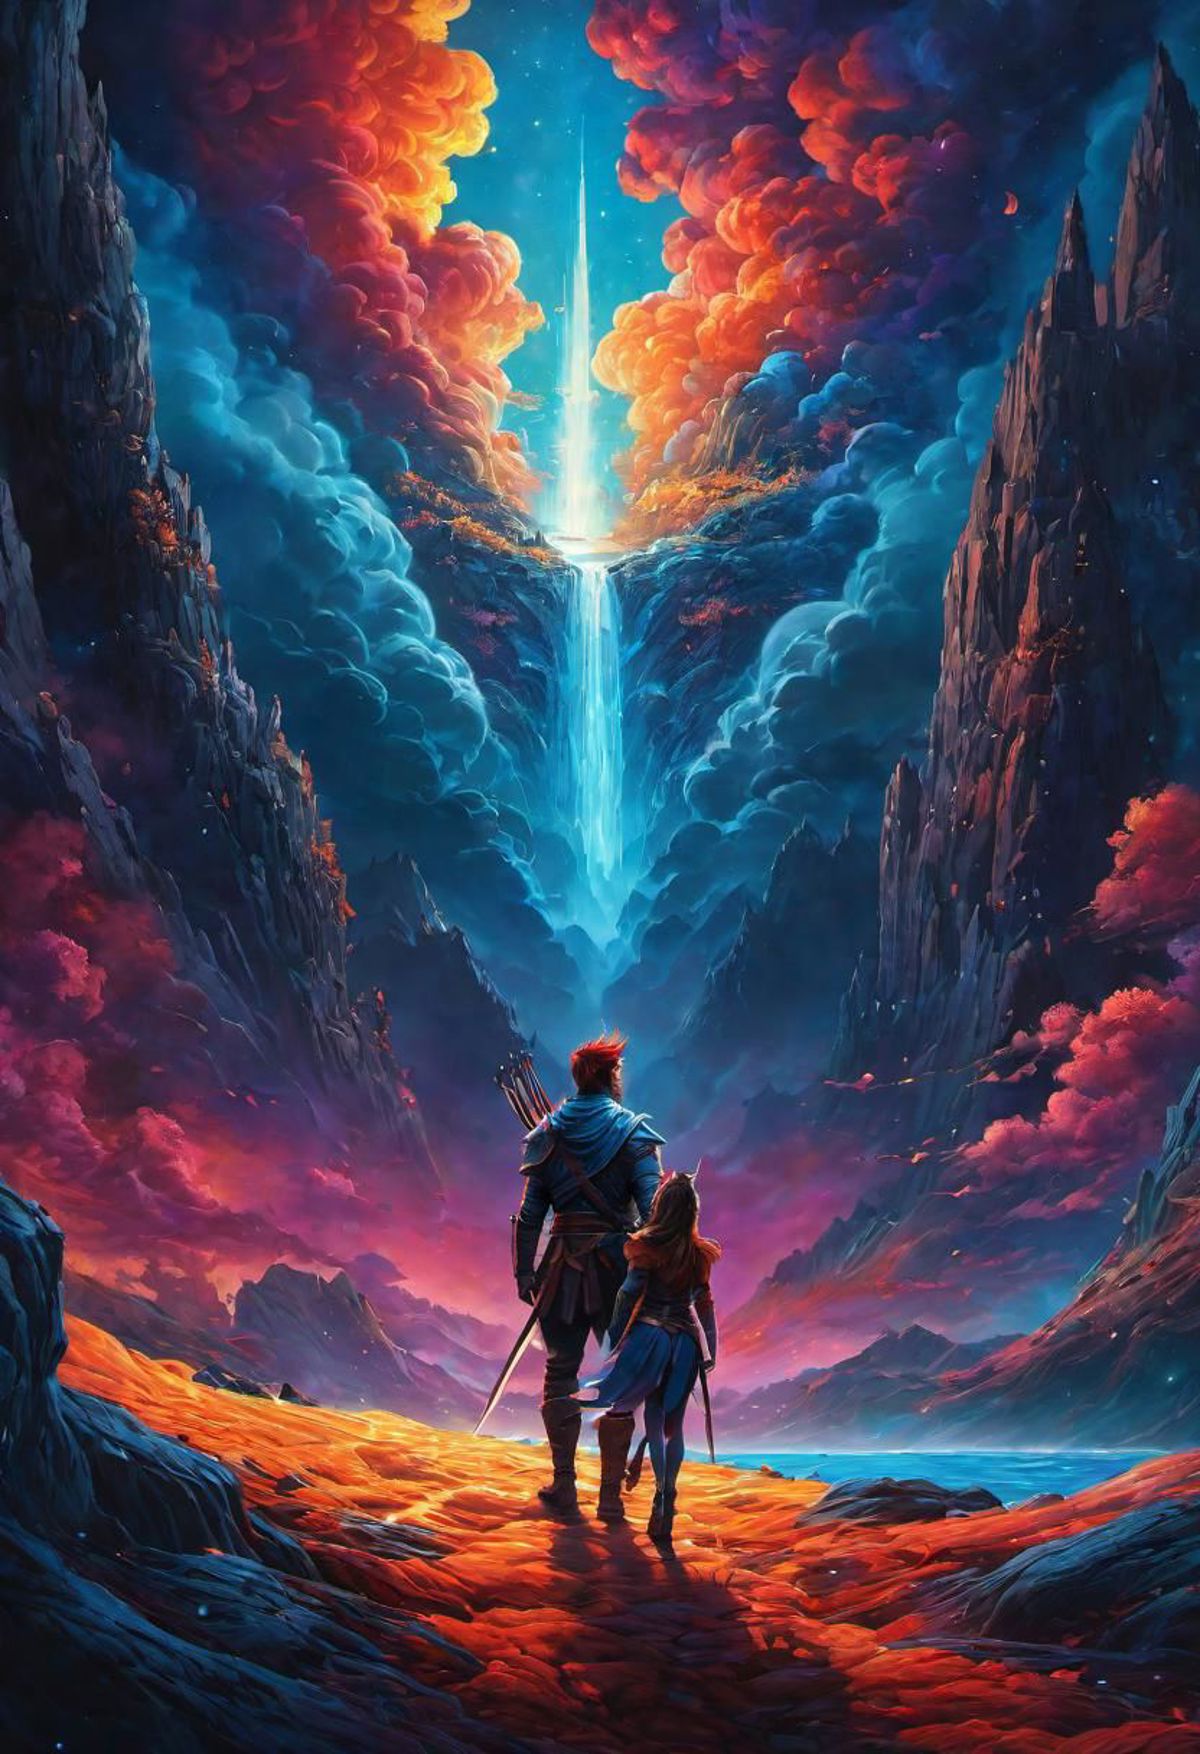 A fantasy painting of a man and a woman standing in front of a waterfall.